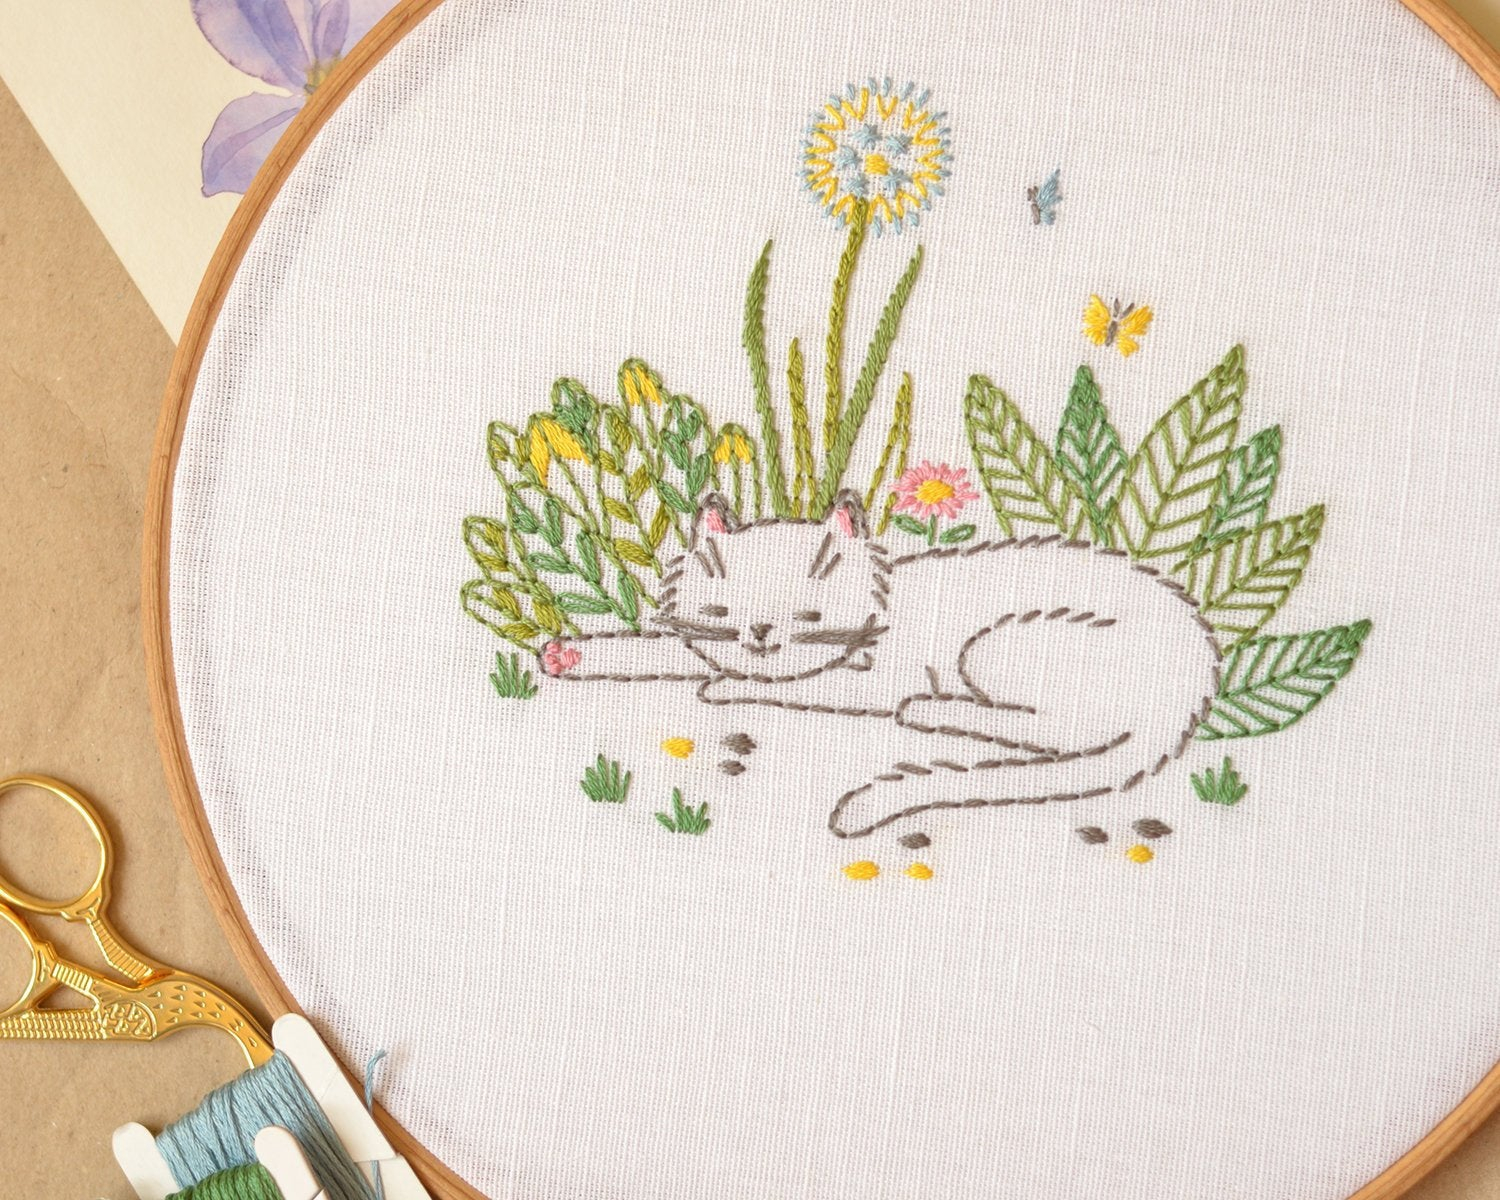 English Embroidery Patterns Cat And Dandelion Hand Embroidery Patterns Pdf Summer Garden Floral Embroidery Cute Gift Naiveneedle